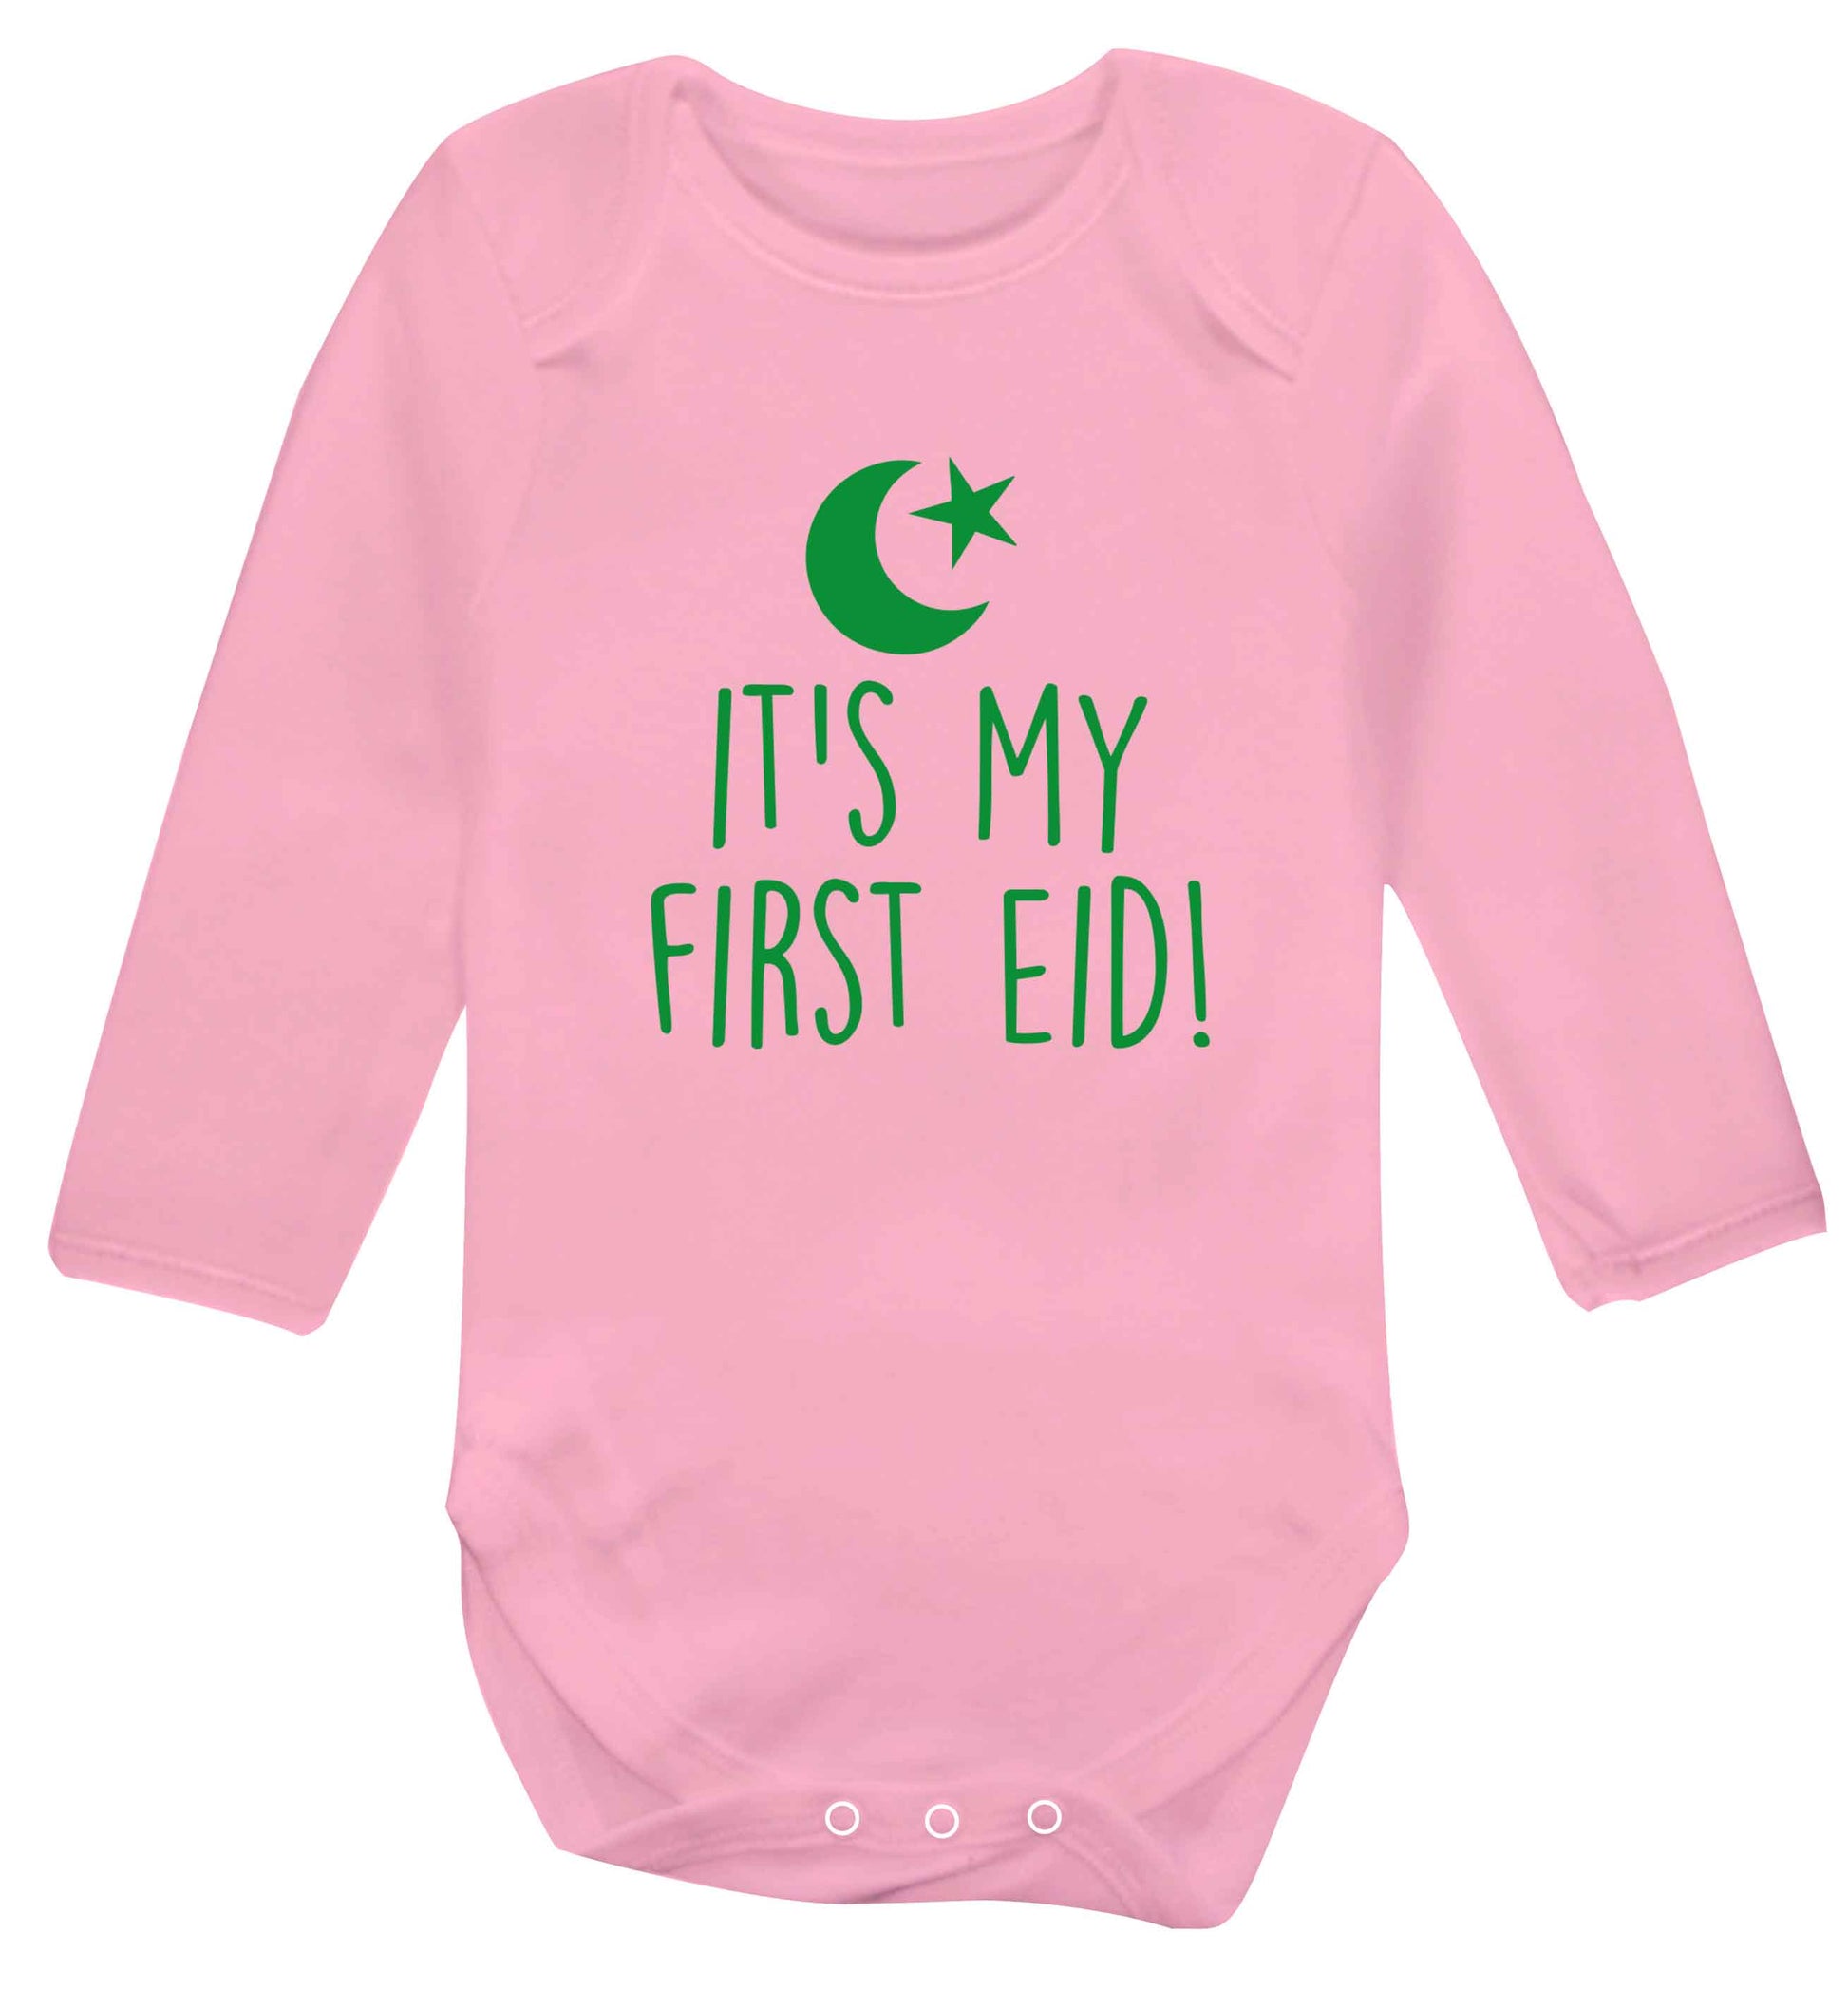 It's my first Eid baby vest long sleeved pale pink 6-12 months